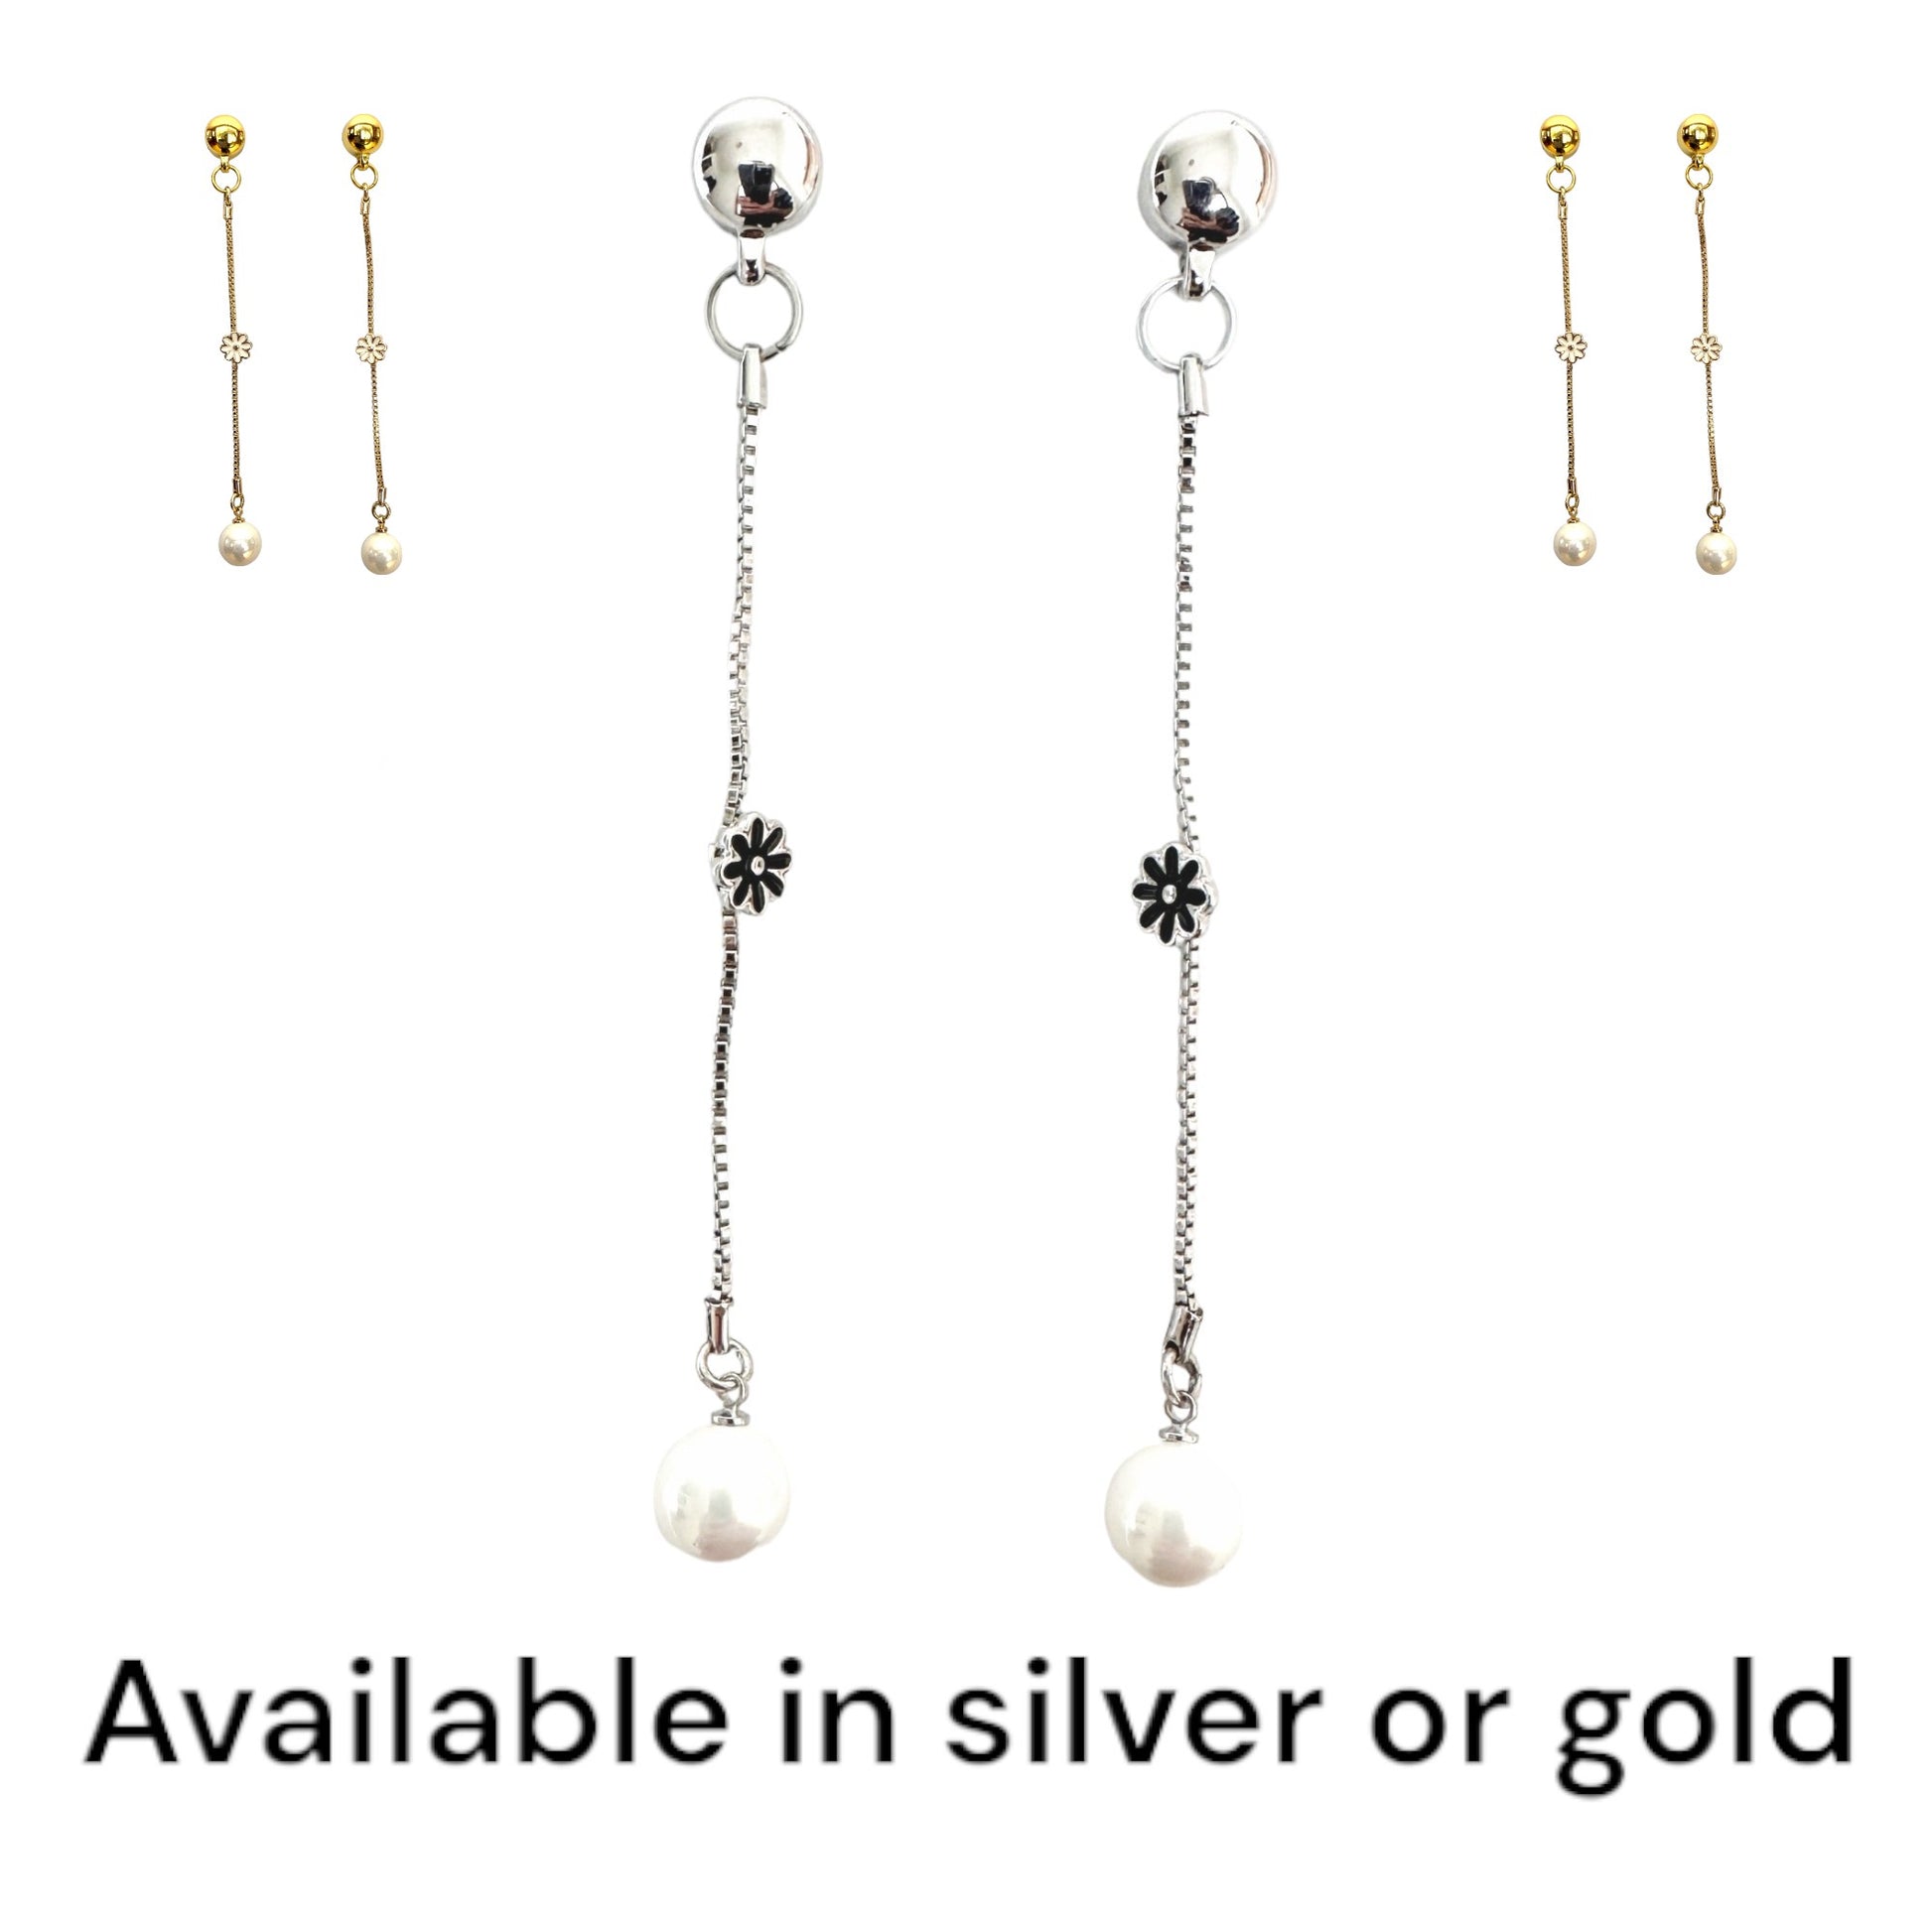 TI-GO Daisy and Pearl earrings. Magnetic titanium interchangeable earring system. Detachable earrings for a truly hypoallergenic jewellery on a white background. silver and gold